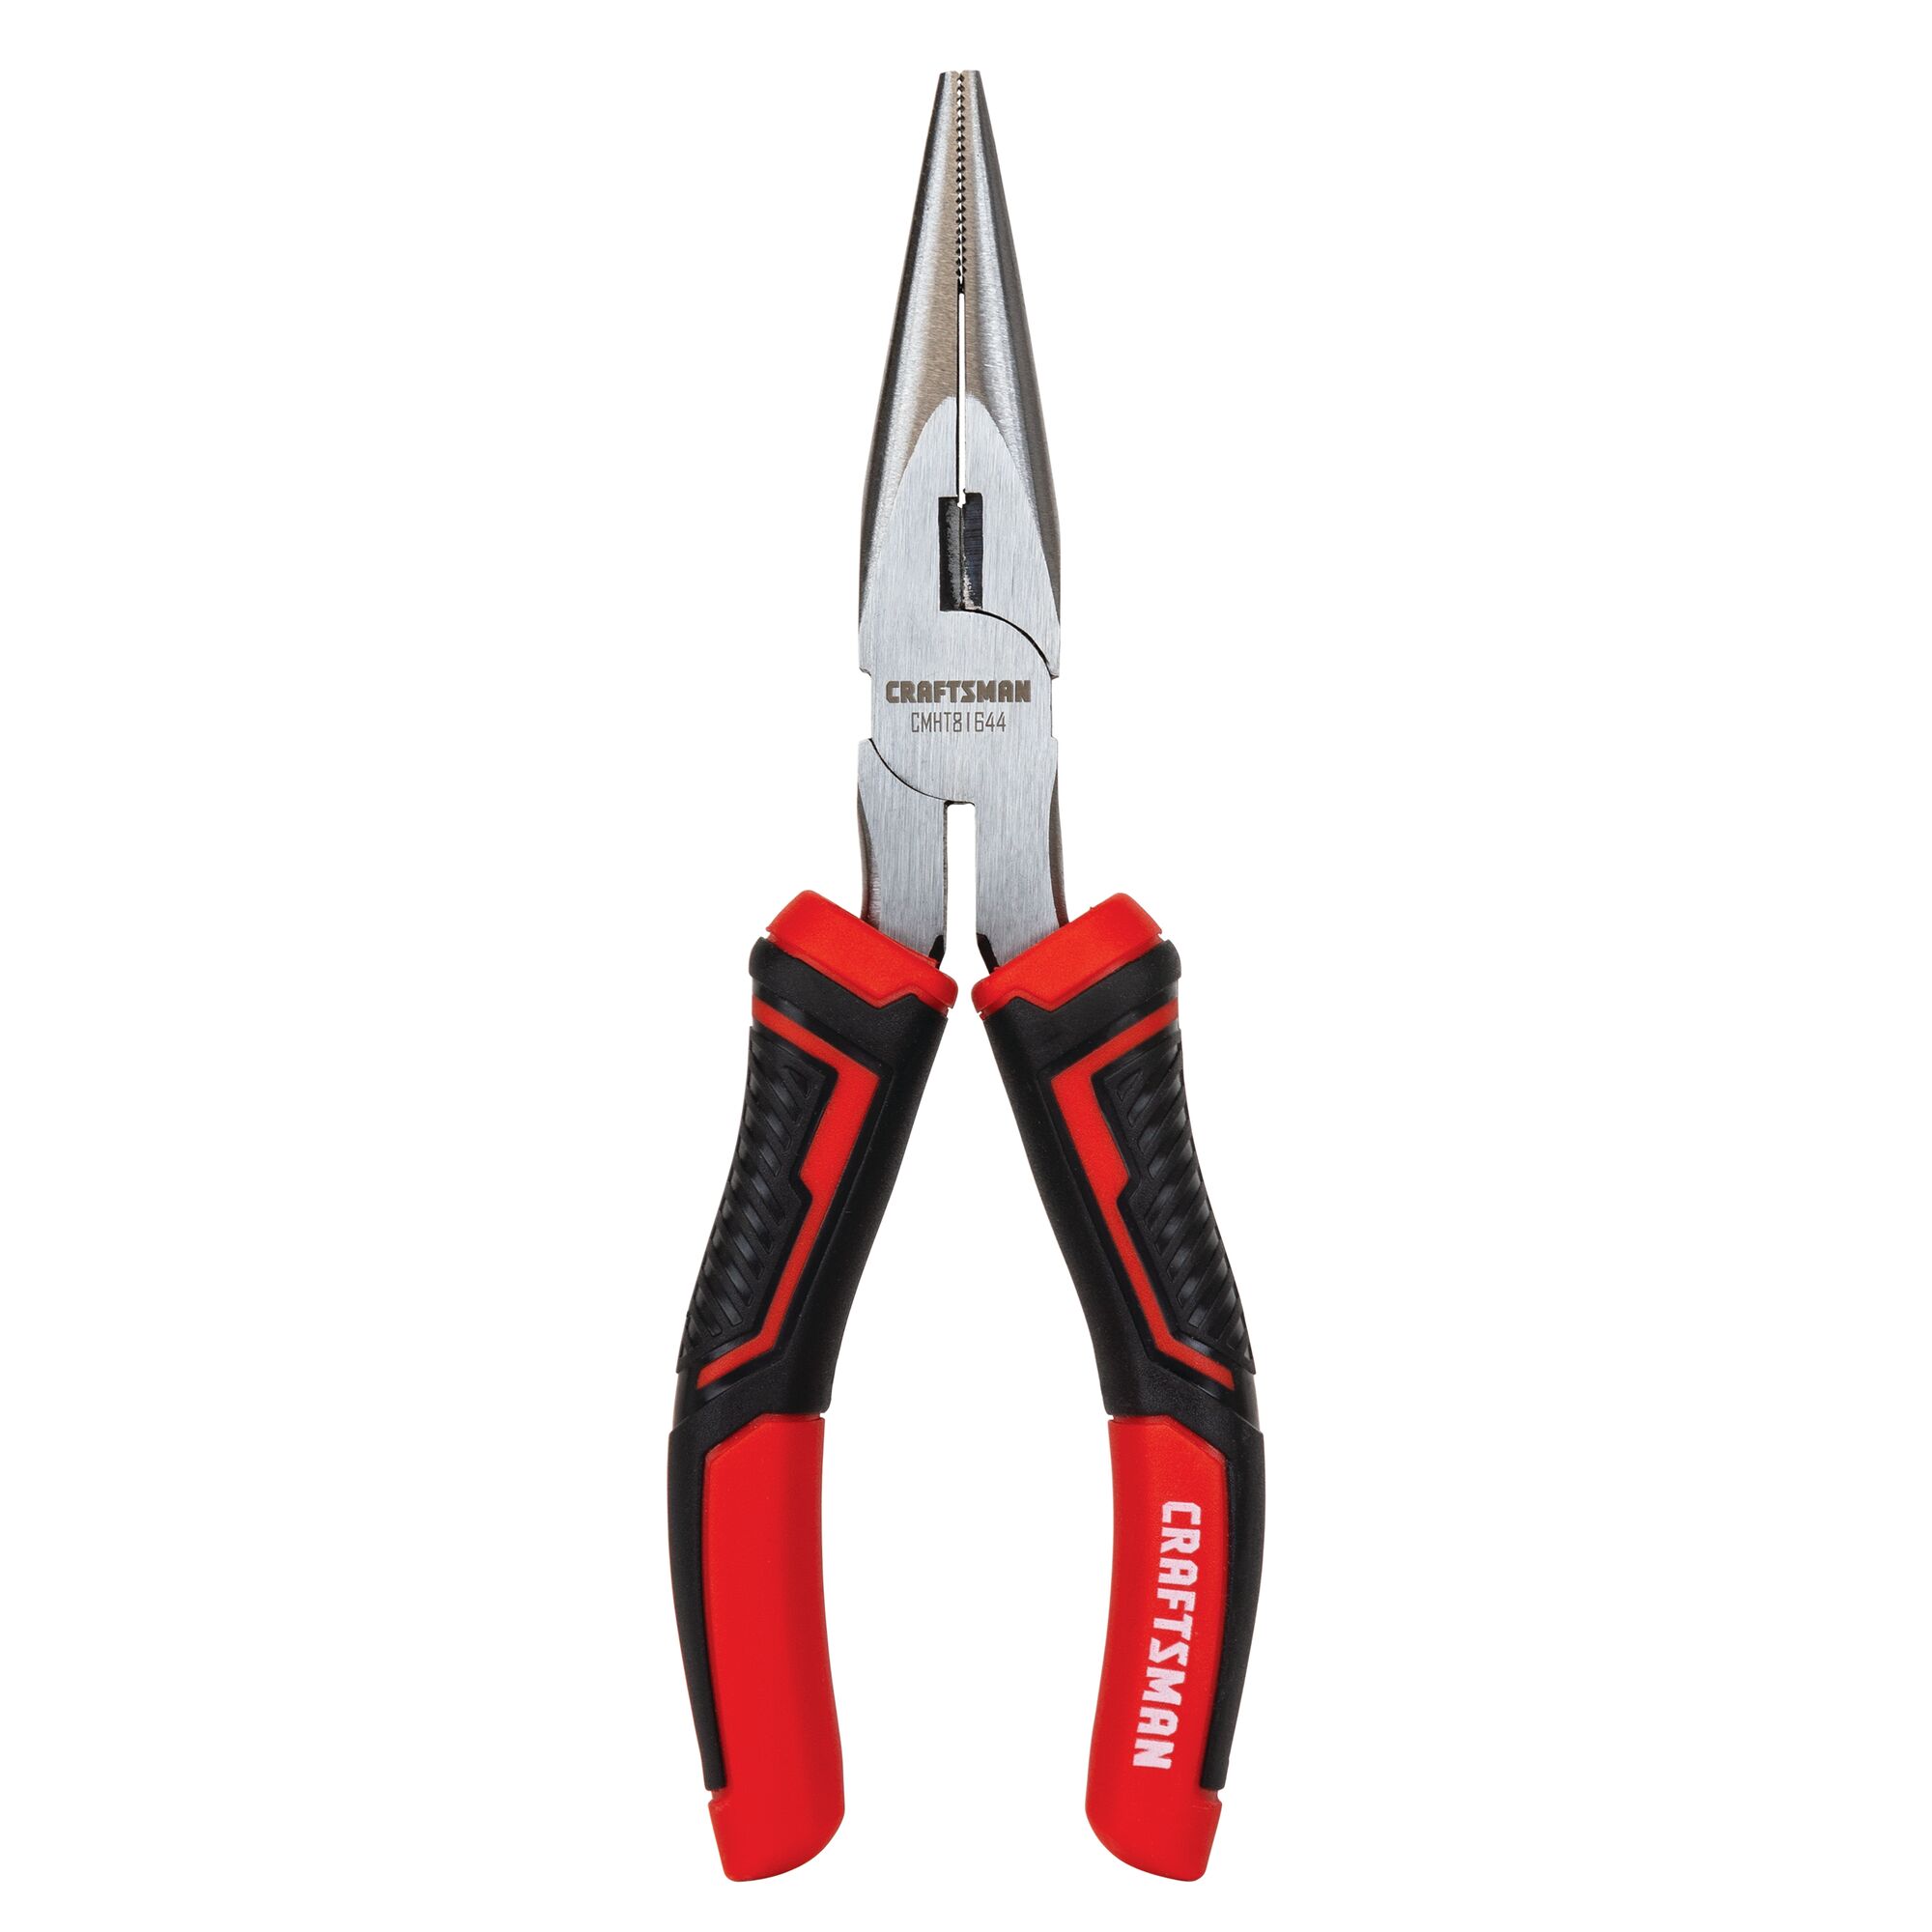 View of CRAFTSMAN Pliers: Long Nose on white background